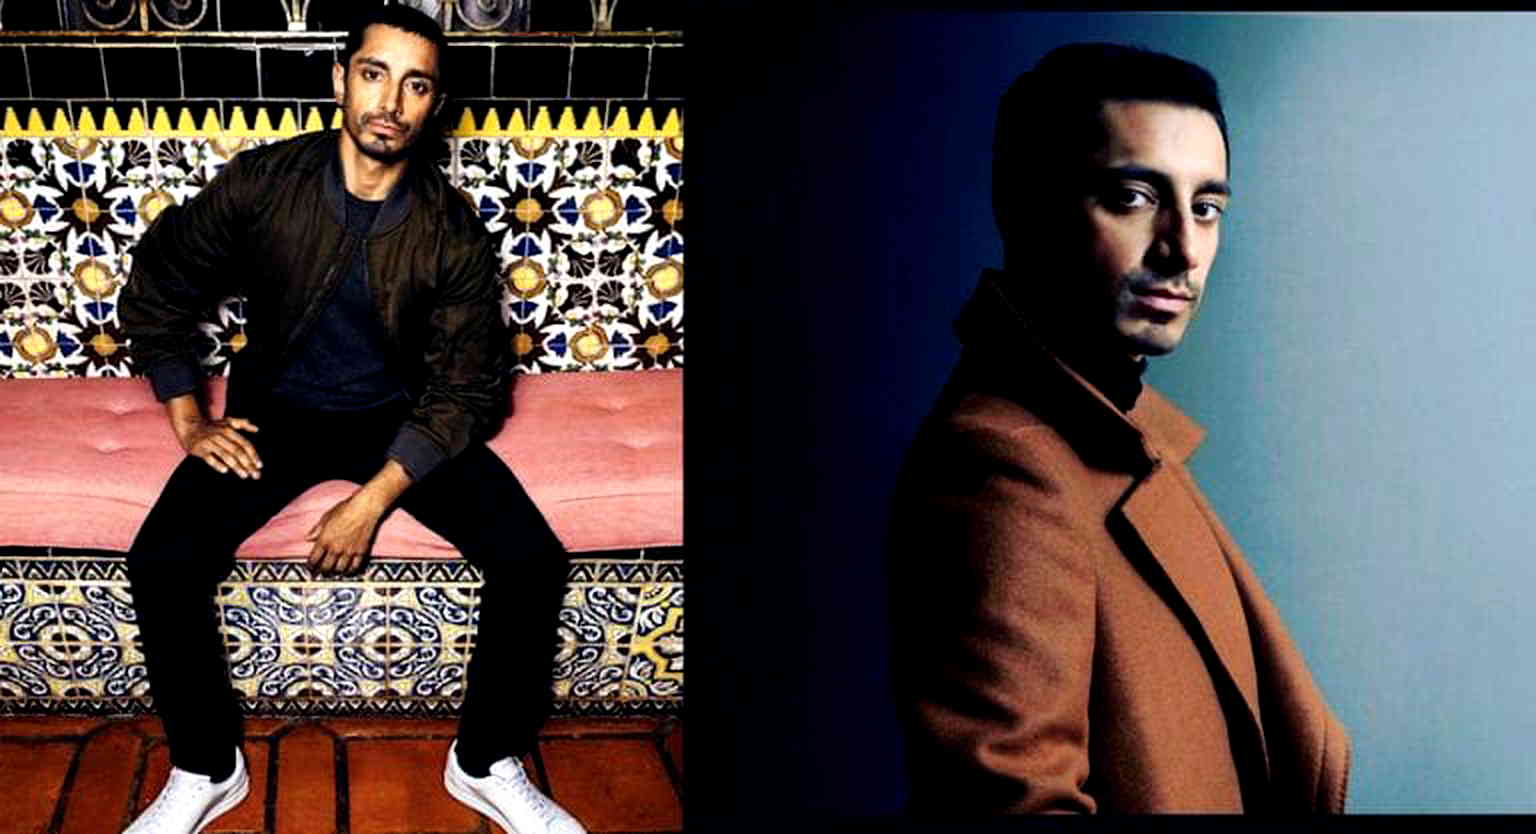 Riz Ahmed Says He Would ‘Rather Be Broke’ Than Play a ‘Terrorist’ in Hollywood